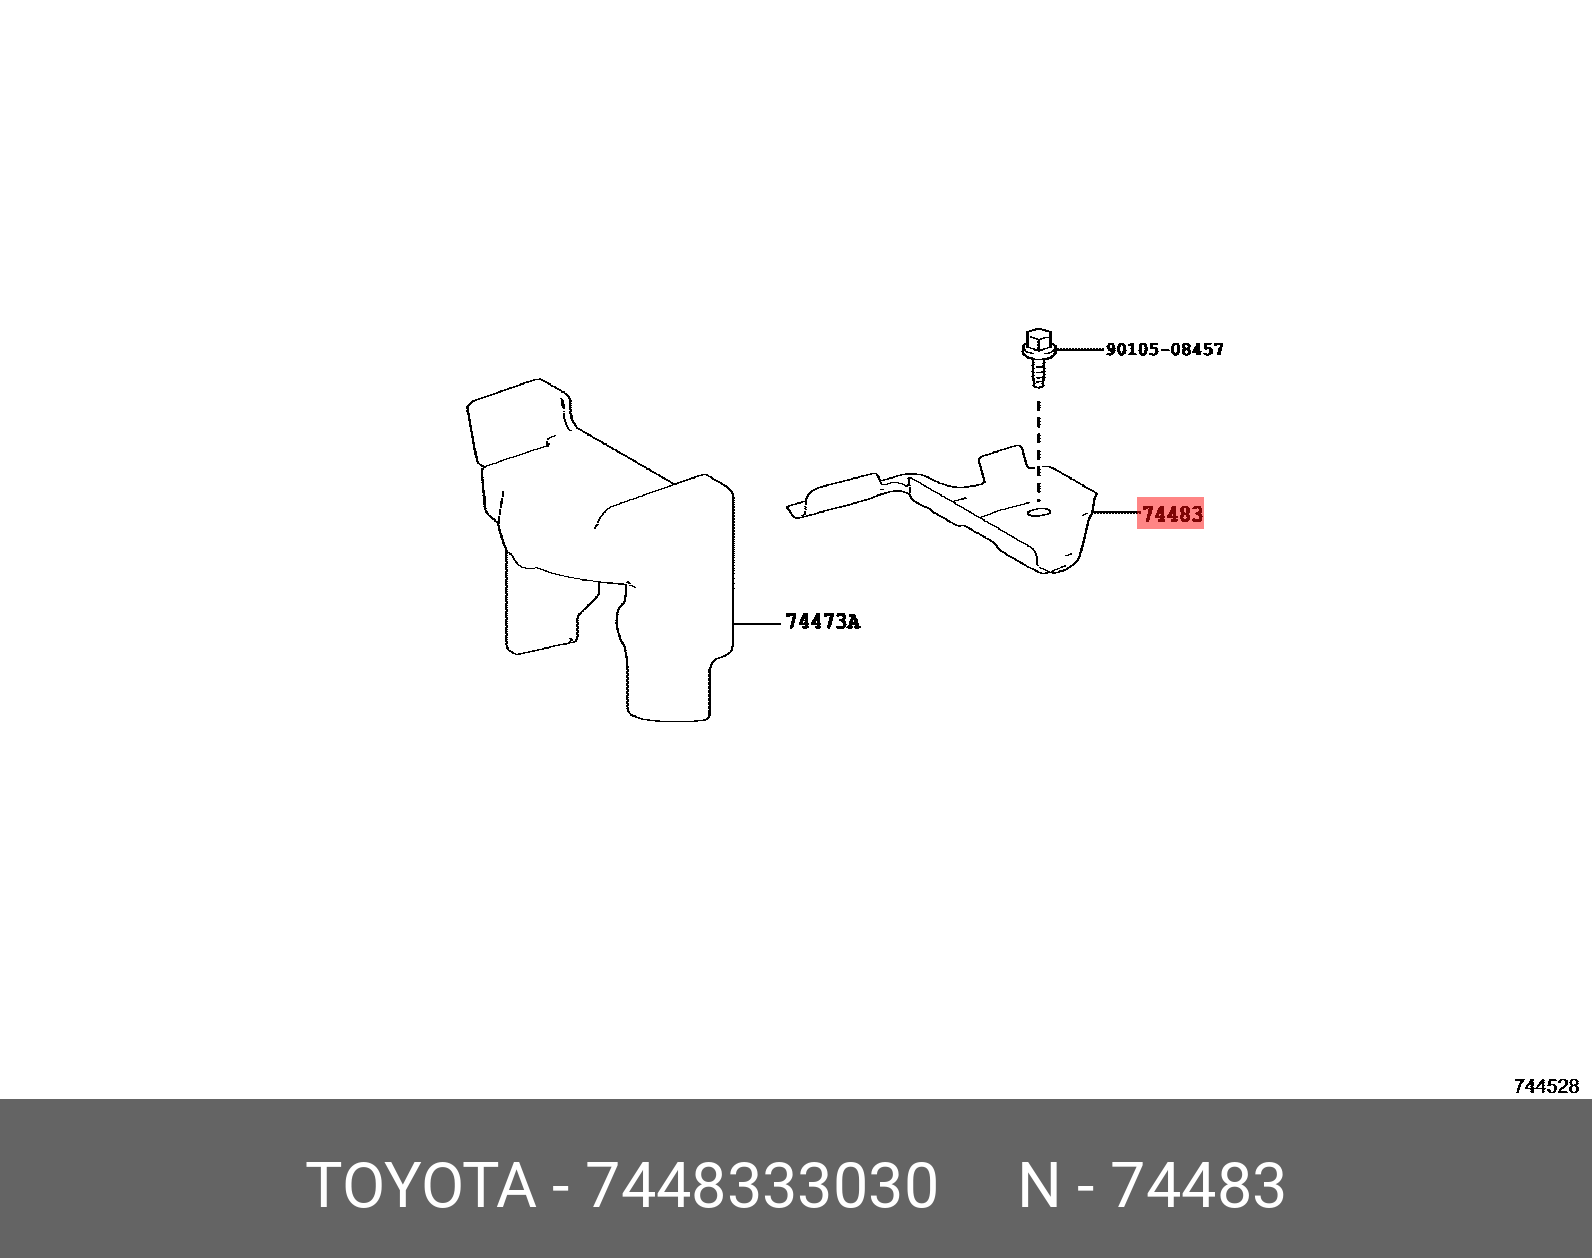 CAMRY 201706-, CLAMP, BATTERY, NO.3